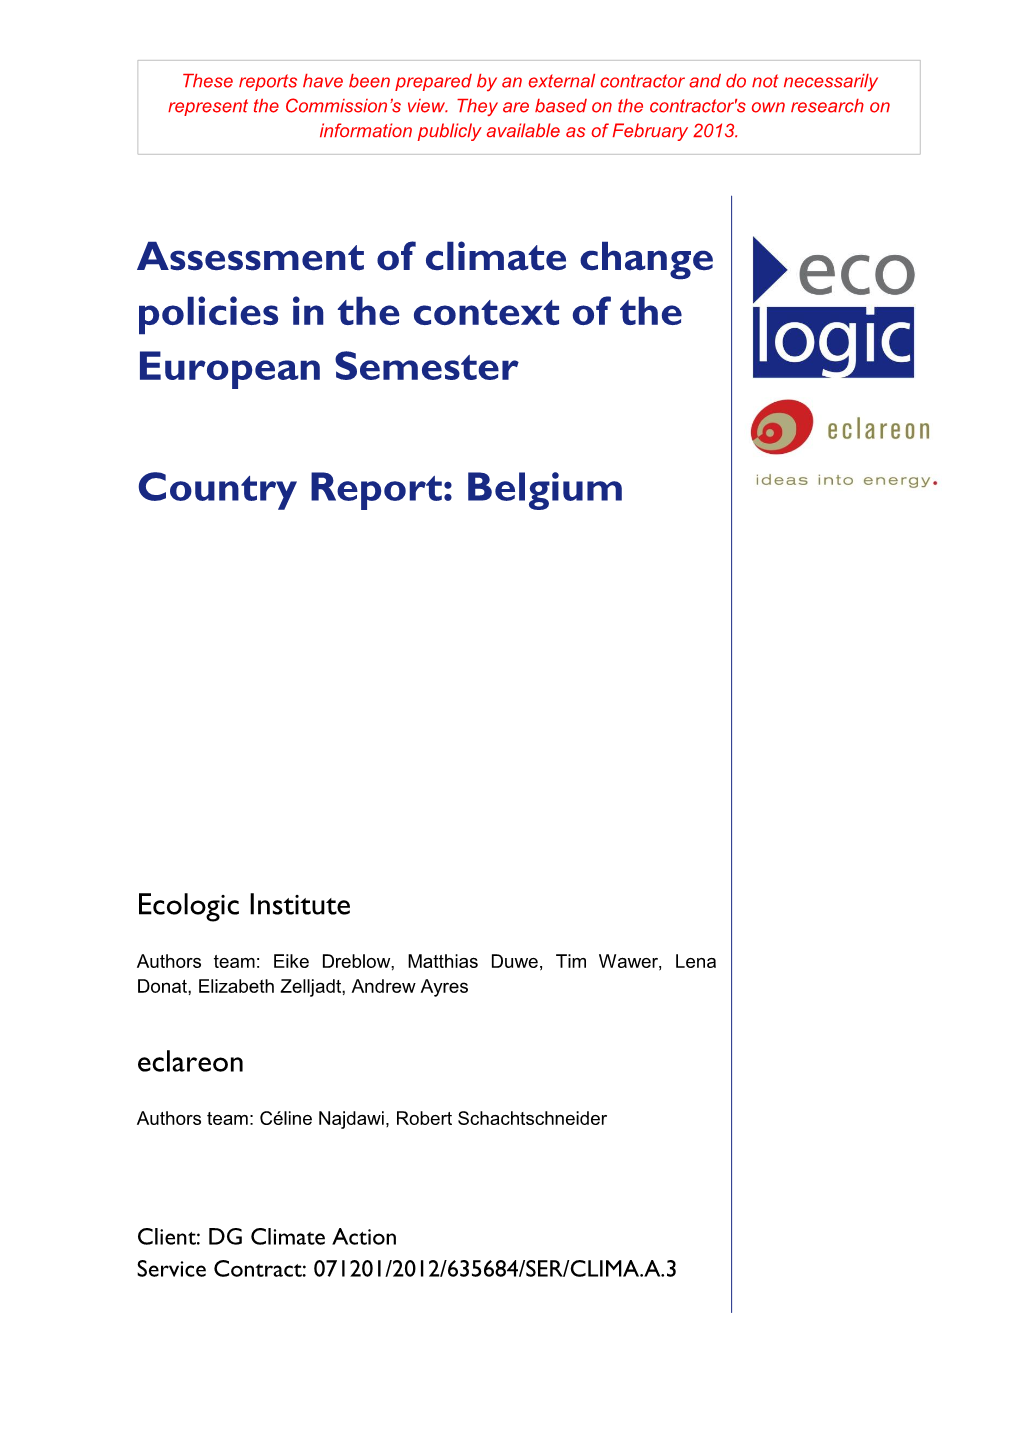 Assessment of Climate Change Policies in the Context of the European Semester